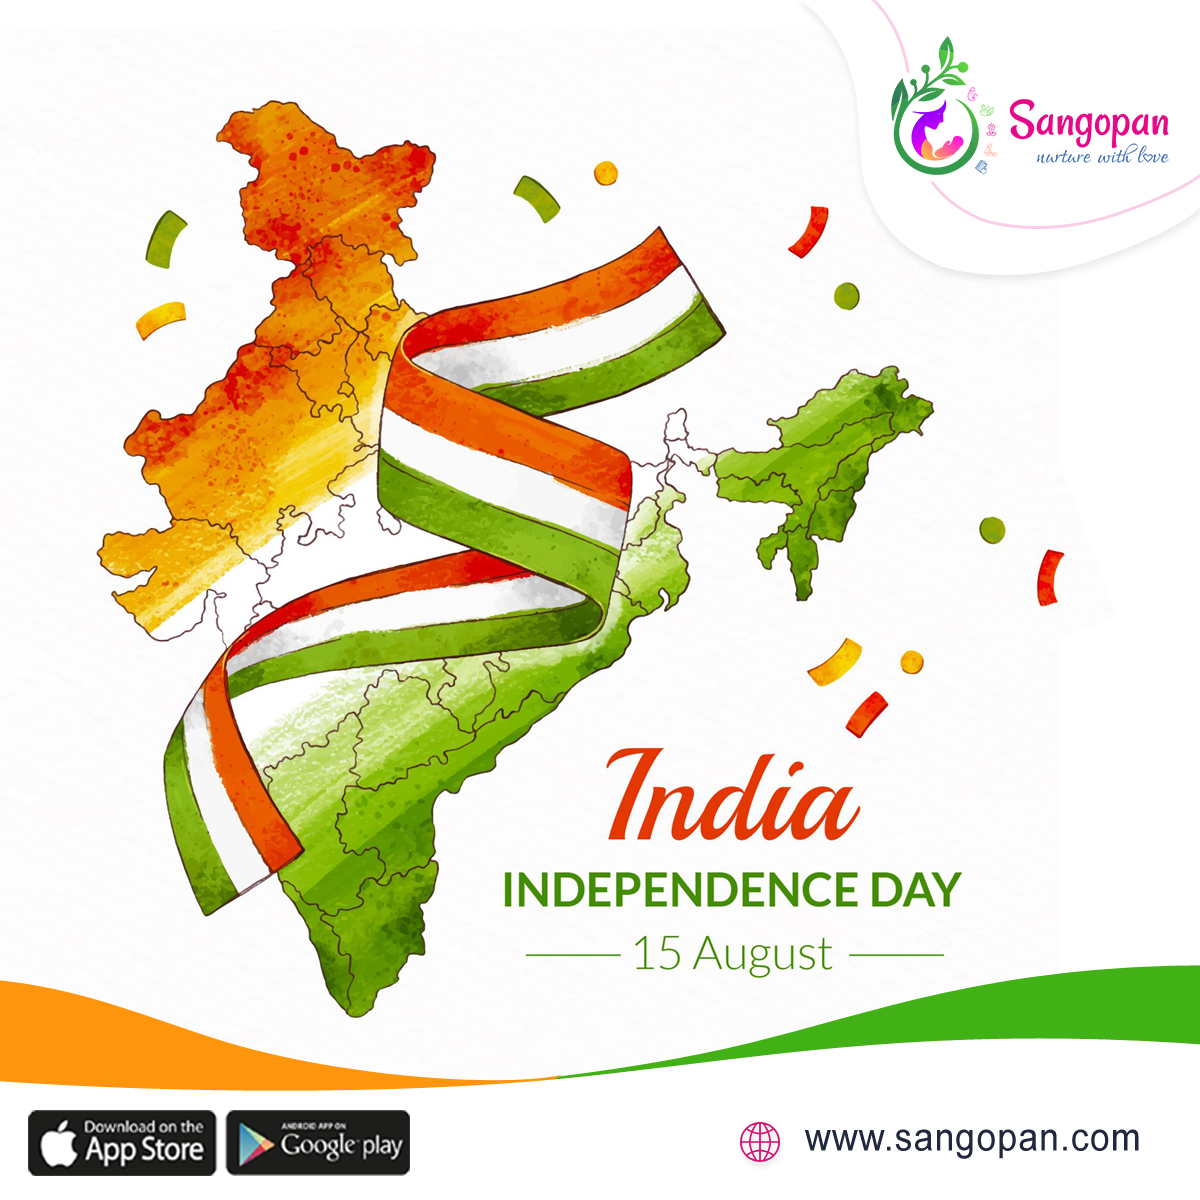 Happy Independence Day! May we always remain united and work towards the progress of our great nation. sangopan.com #sangopan #mothercare #prenatal #postnatal #prenatalyoga #prenatalcare #postnatalcare #momblogger #pregnancycare #indipendenceday #15august2023